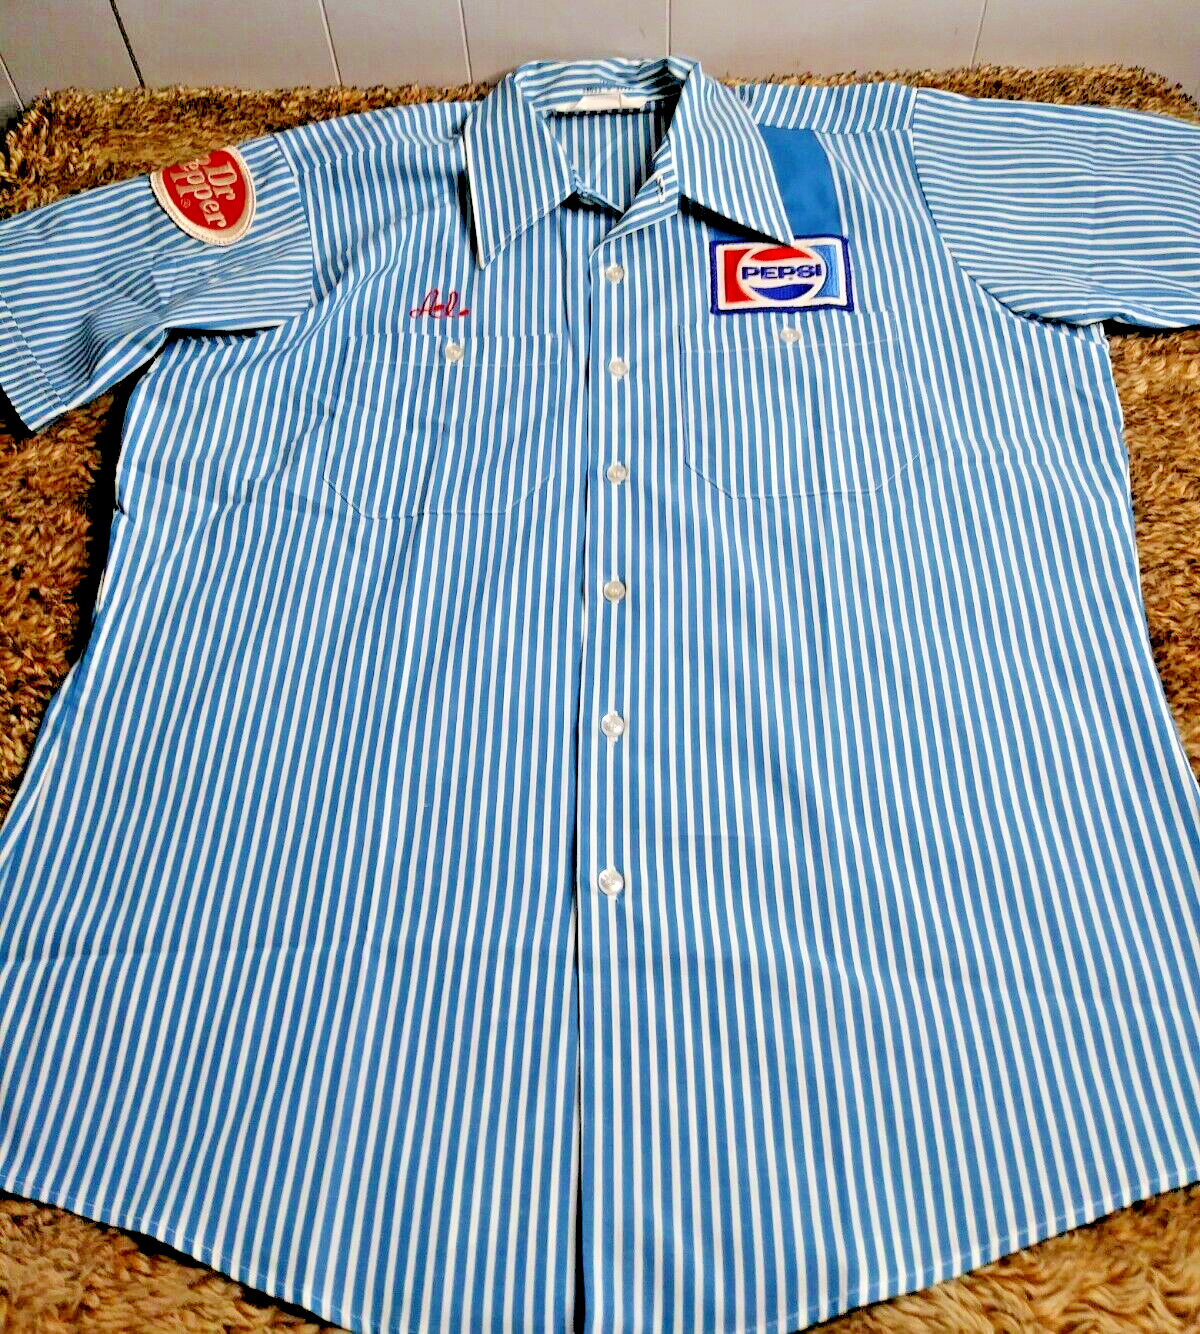 Vintage Old Pepsi & Dr. Pepper Patch Striped Work Shirt Mens L - UNION MADE USA